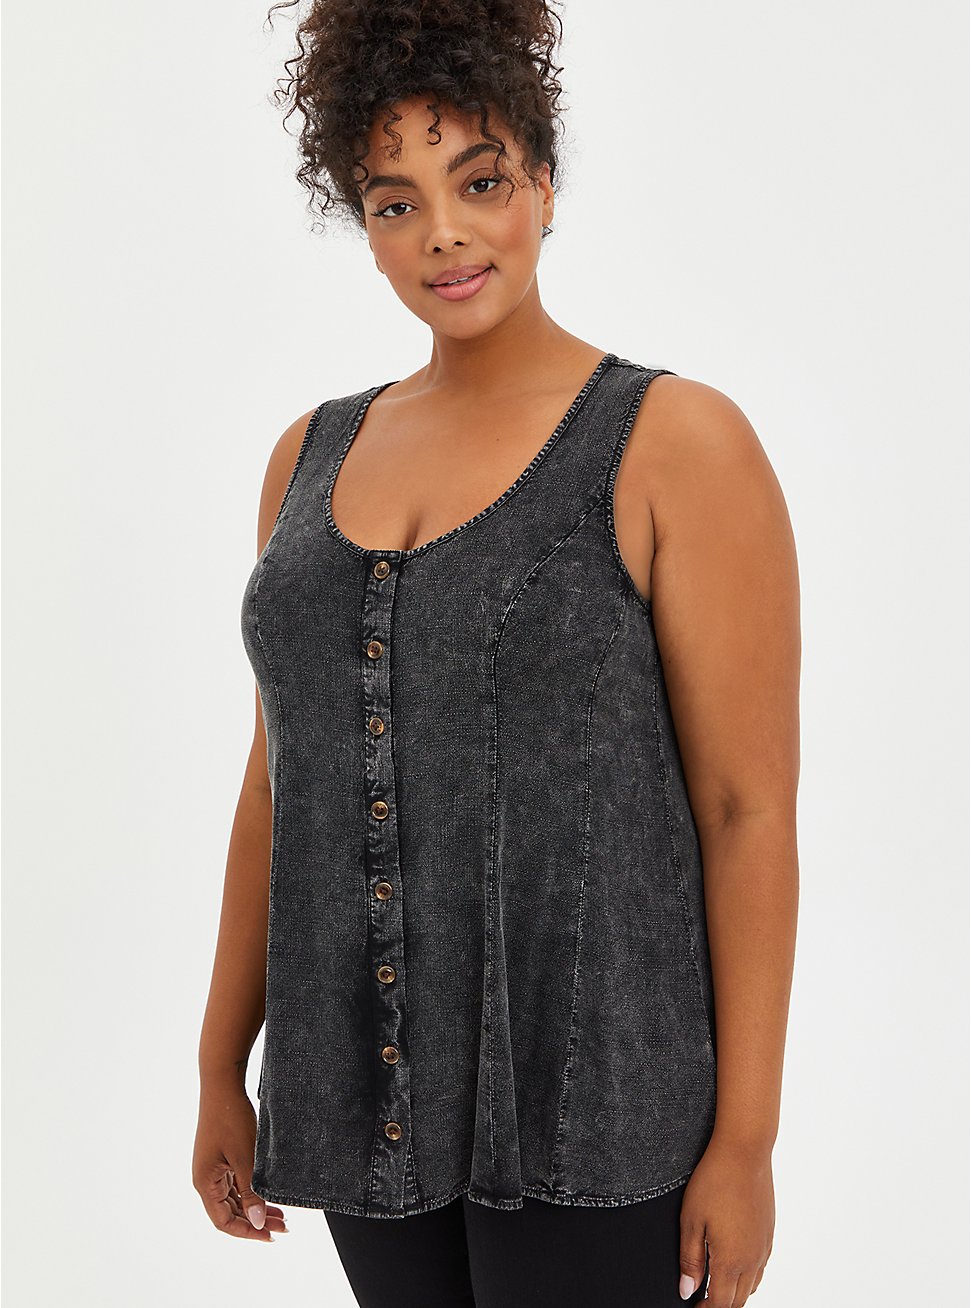 Plus Size Fit & Flare Tank - Textured Stretch Rayon Mineral Wash Black, DEEP BLACK, hi-res